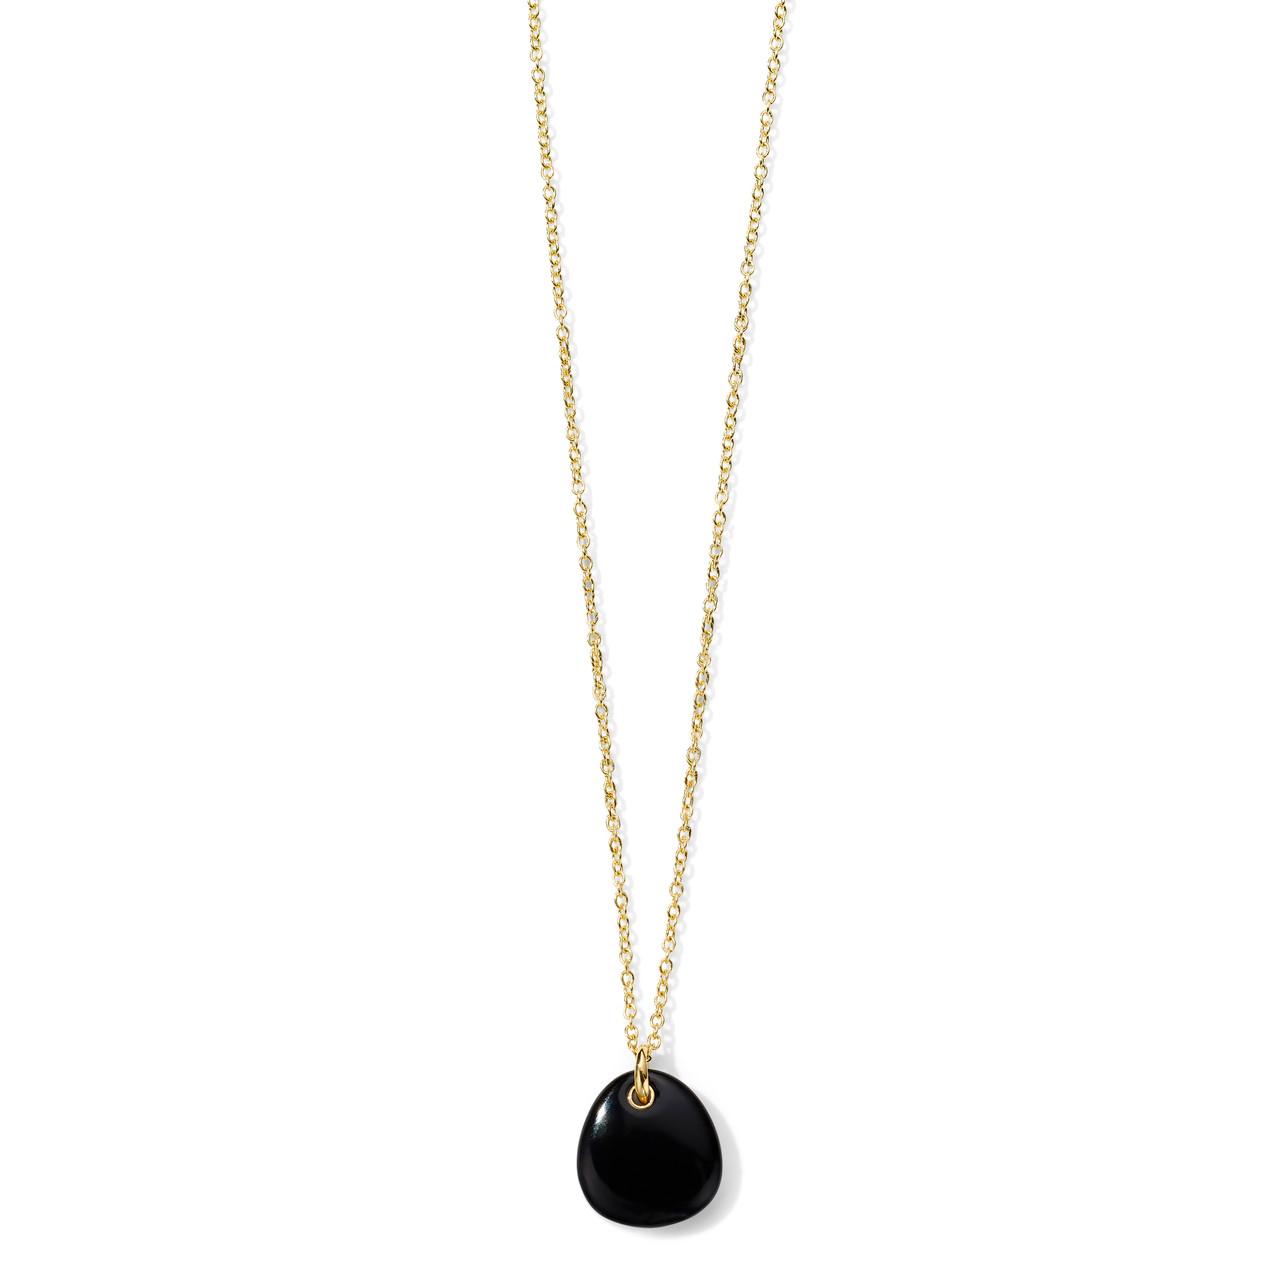 Ippolita Rock Candy Small Black Onyx Pebble Pendant Necklace in 18k Gold